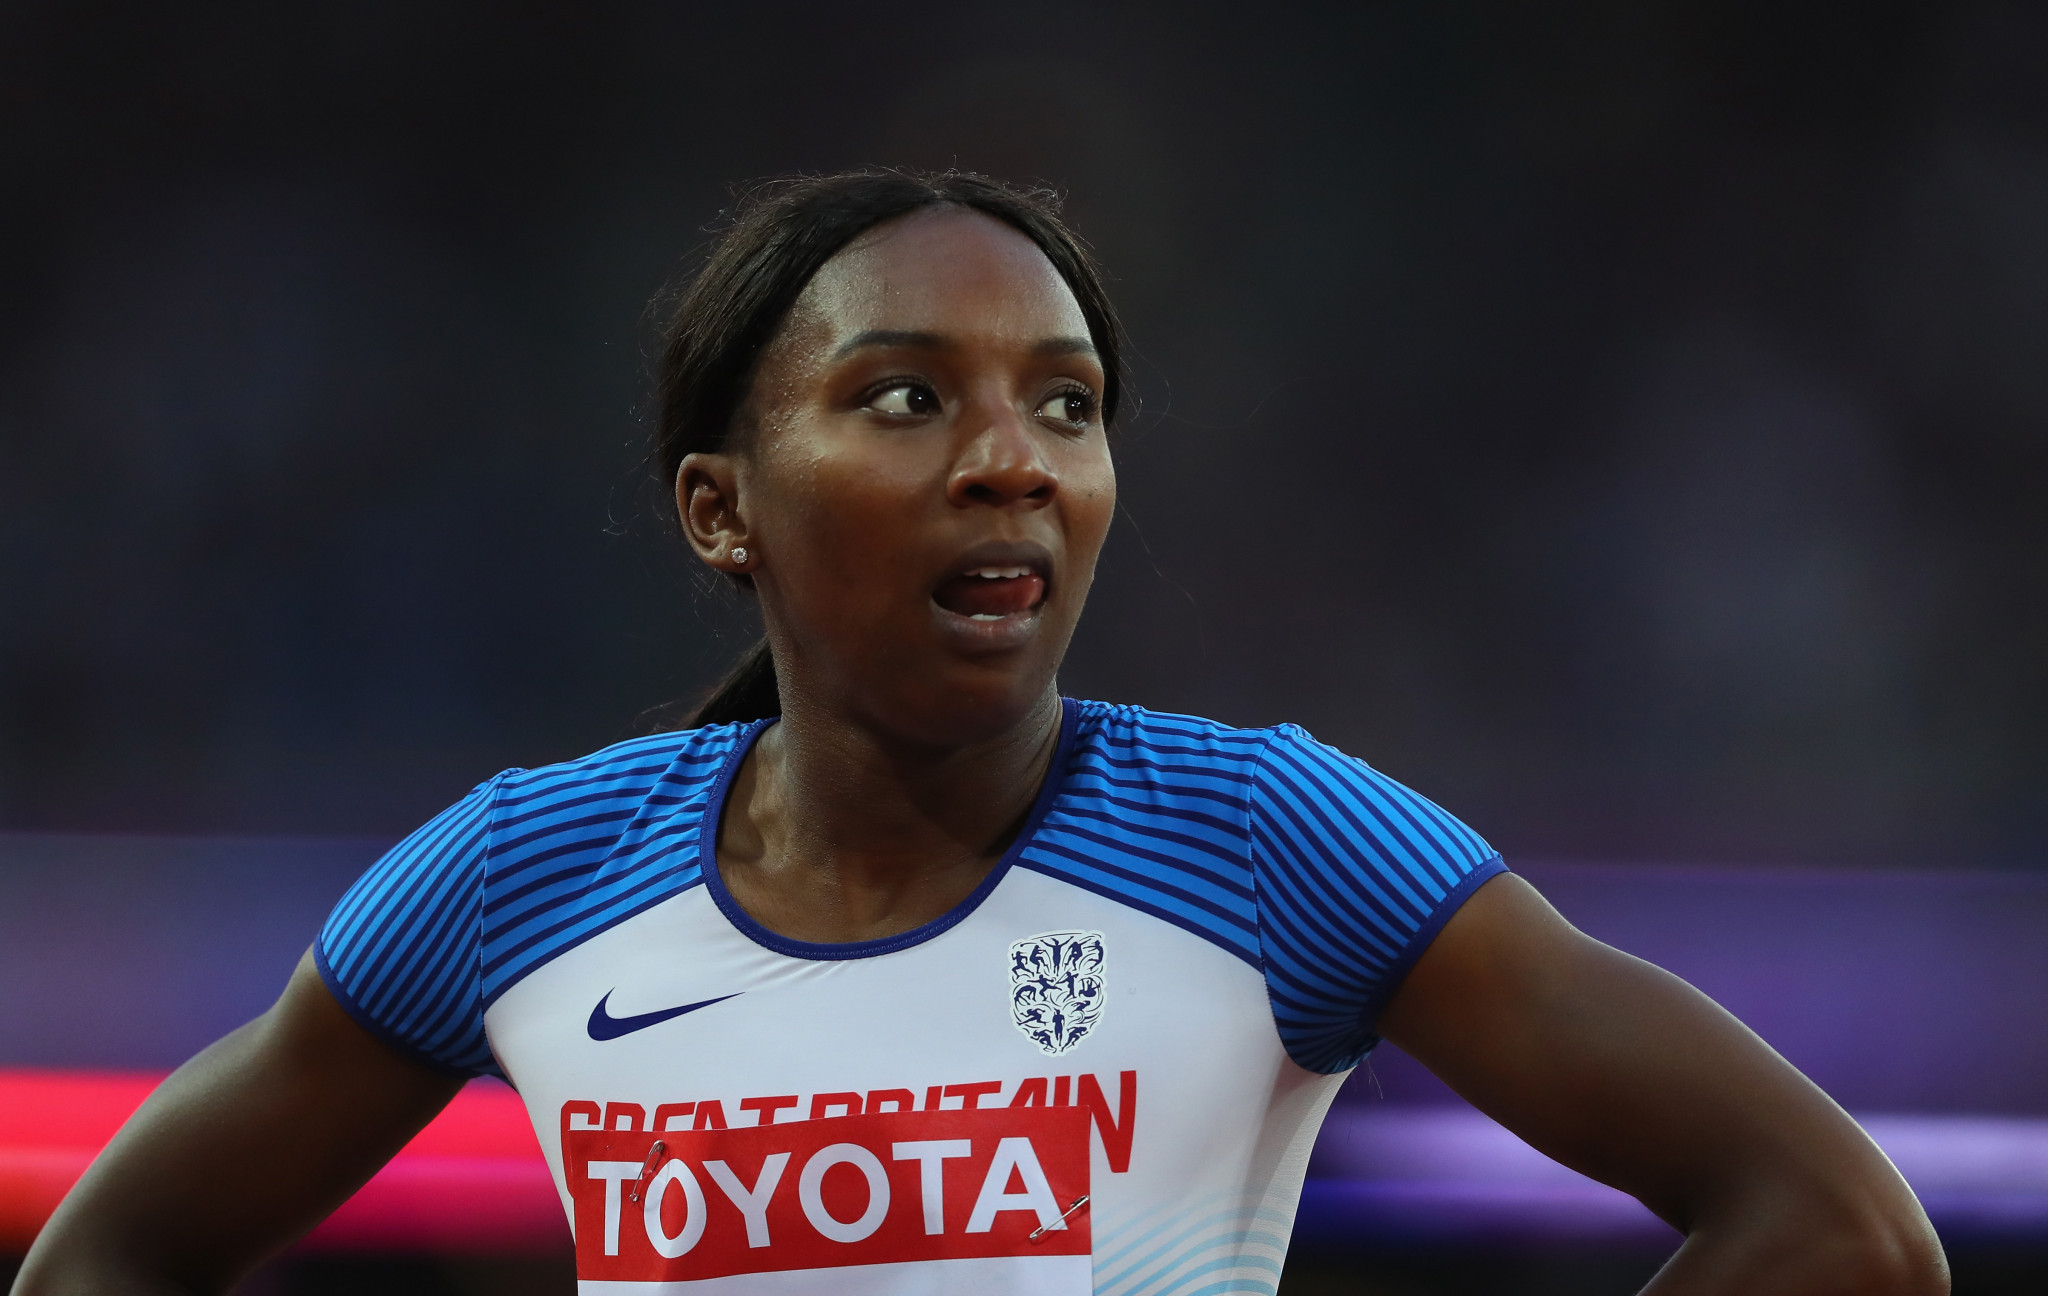 British sprinter Williams accuses police of racial profiling after traffic search